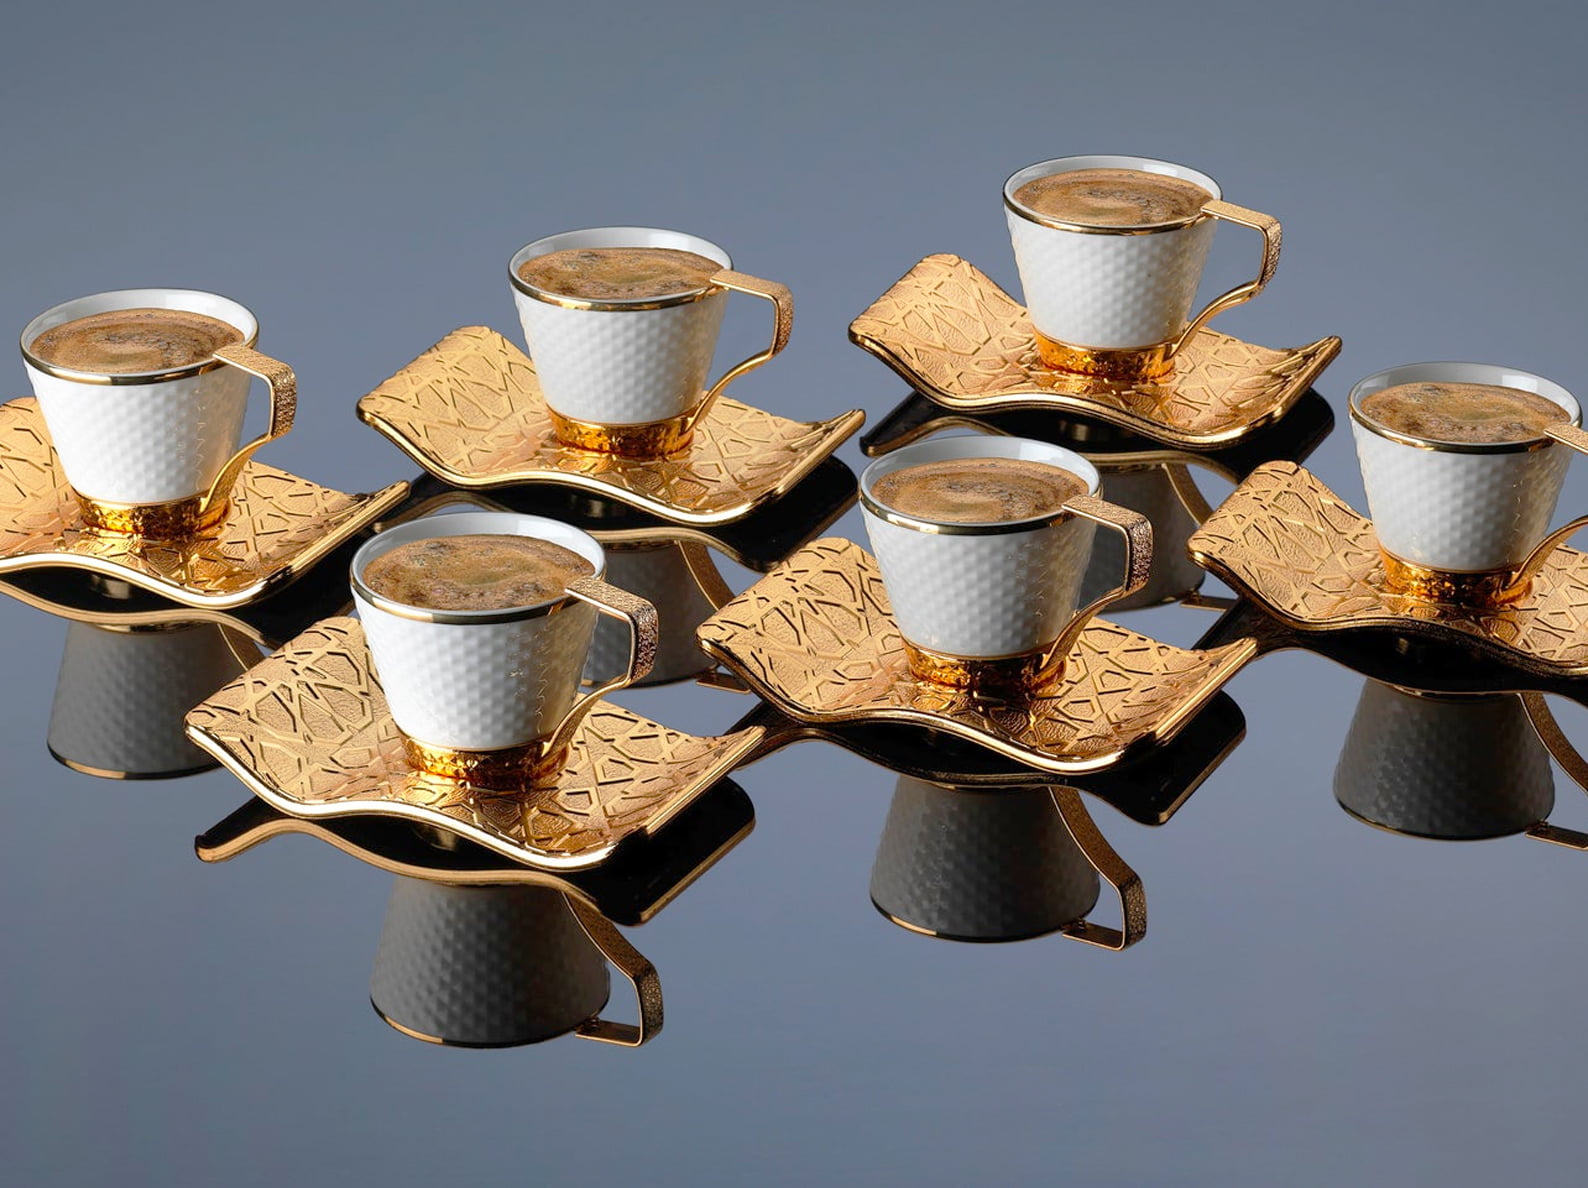 https://traditionalturk.com/wp-content/uploads/2021/05/luxury-gold-color-turkish-coffee-cup-set-for-six-person-2.jpg